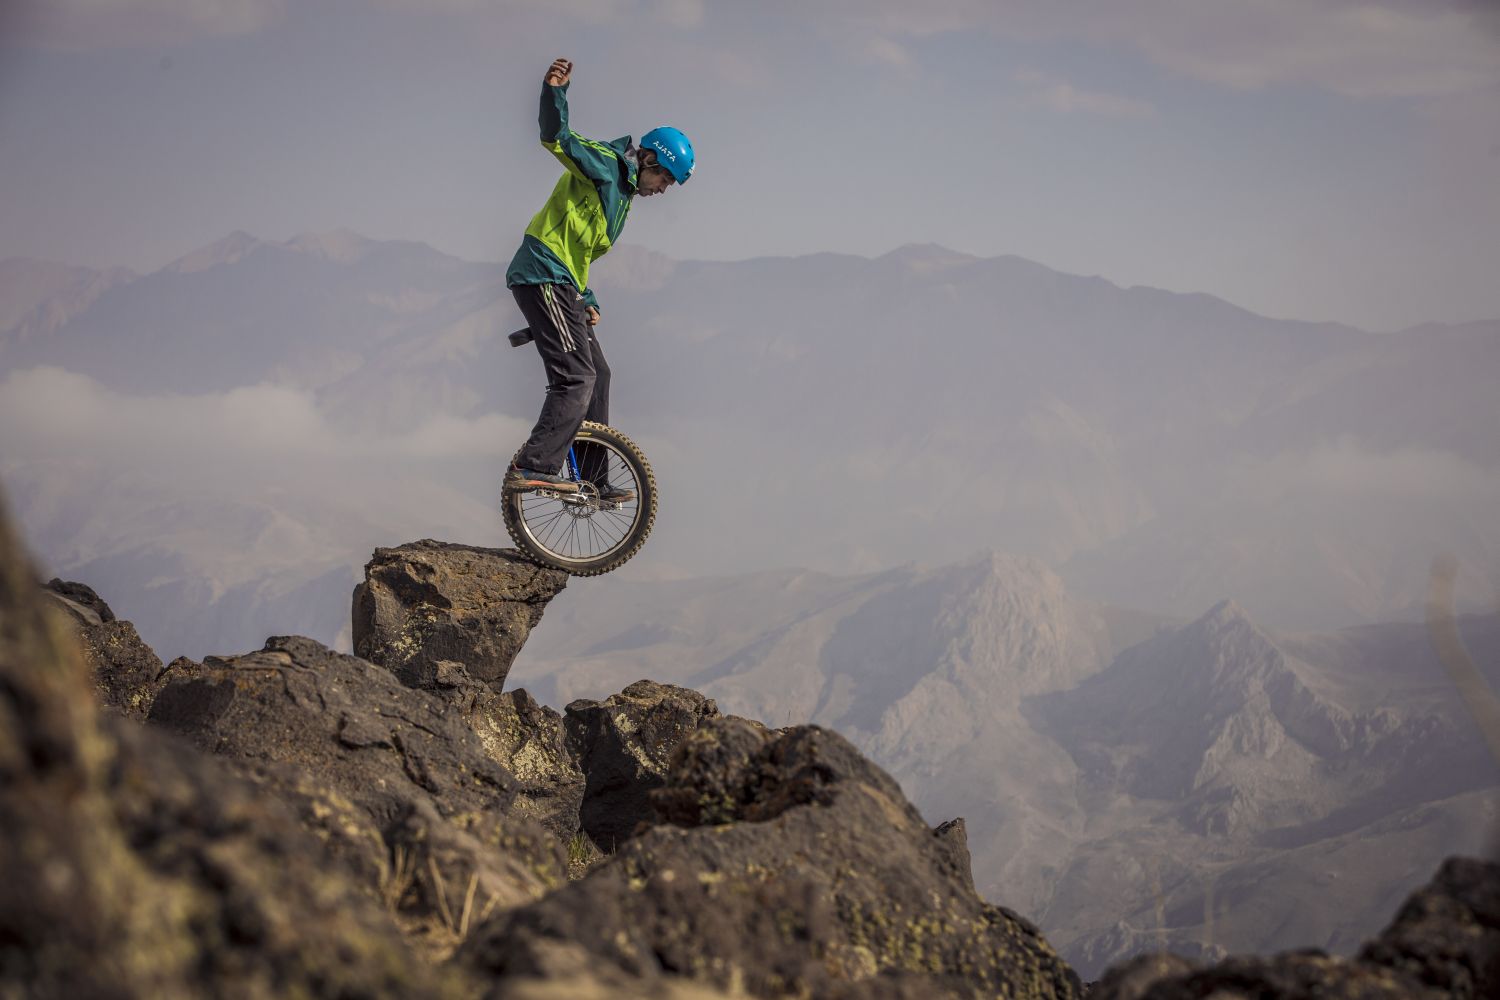 Downhill unicycling on the highest mountain in Iran